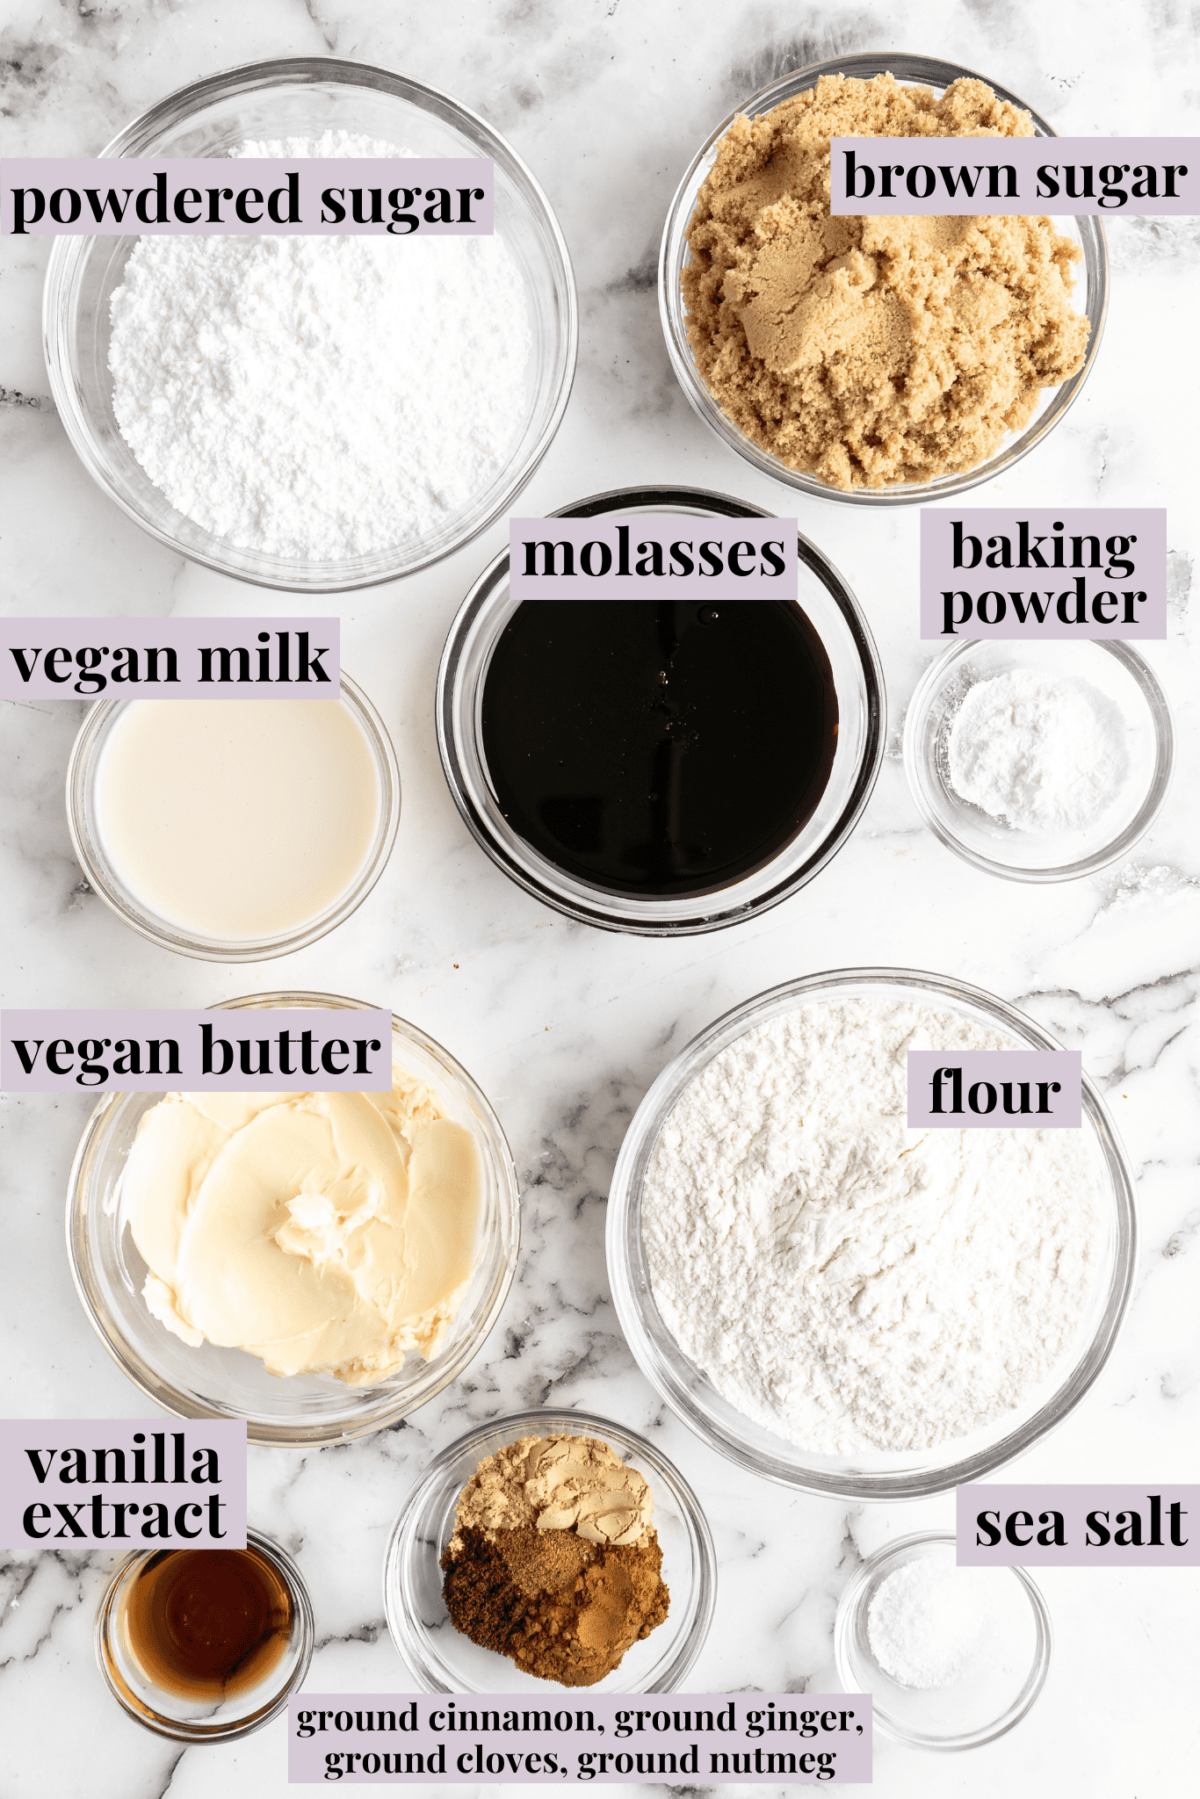 Overhead view of all the labeled ingredients for gingerbread men: powdered sugar, brown sugar, vegan milk, molasses, baking powder, vegan butter, flour, vanilla extract, sea salt, and a bowl of cinnamon, nutmeg, ginger, and closves